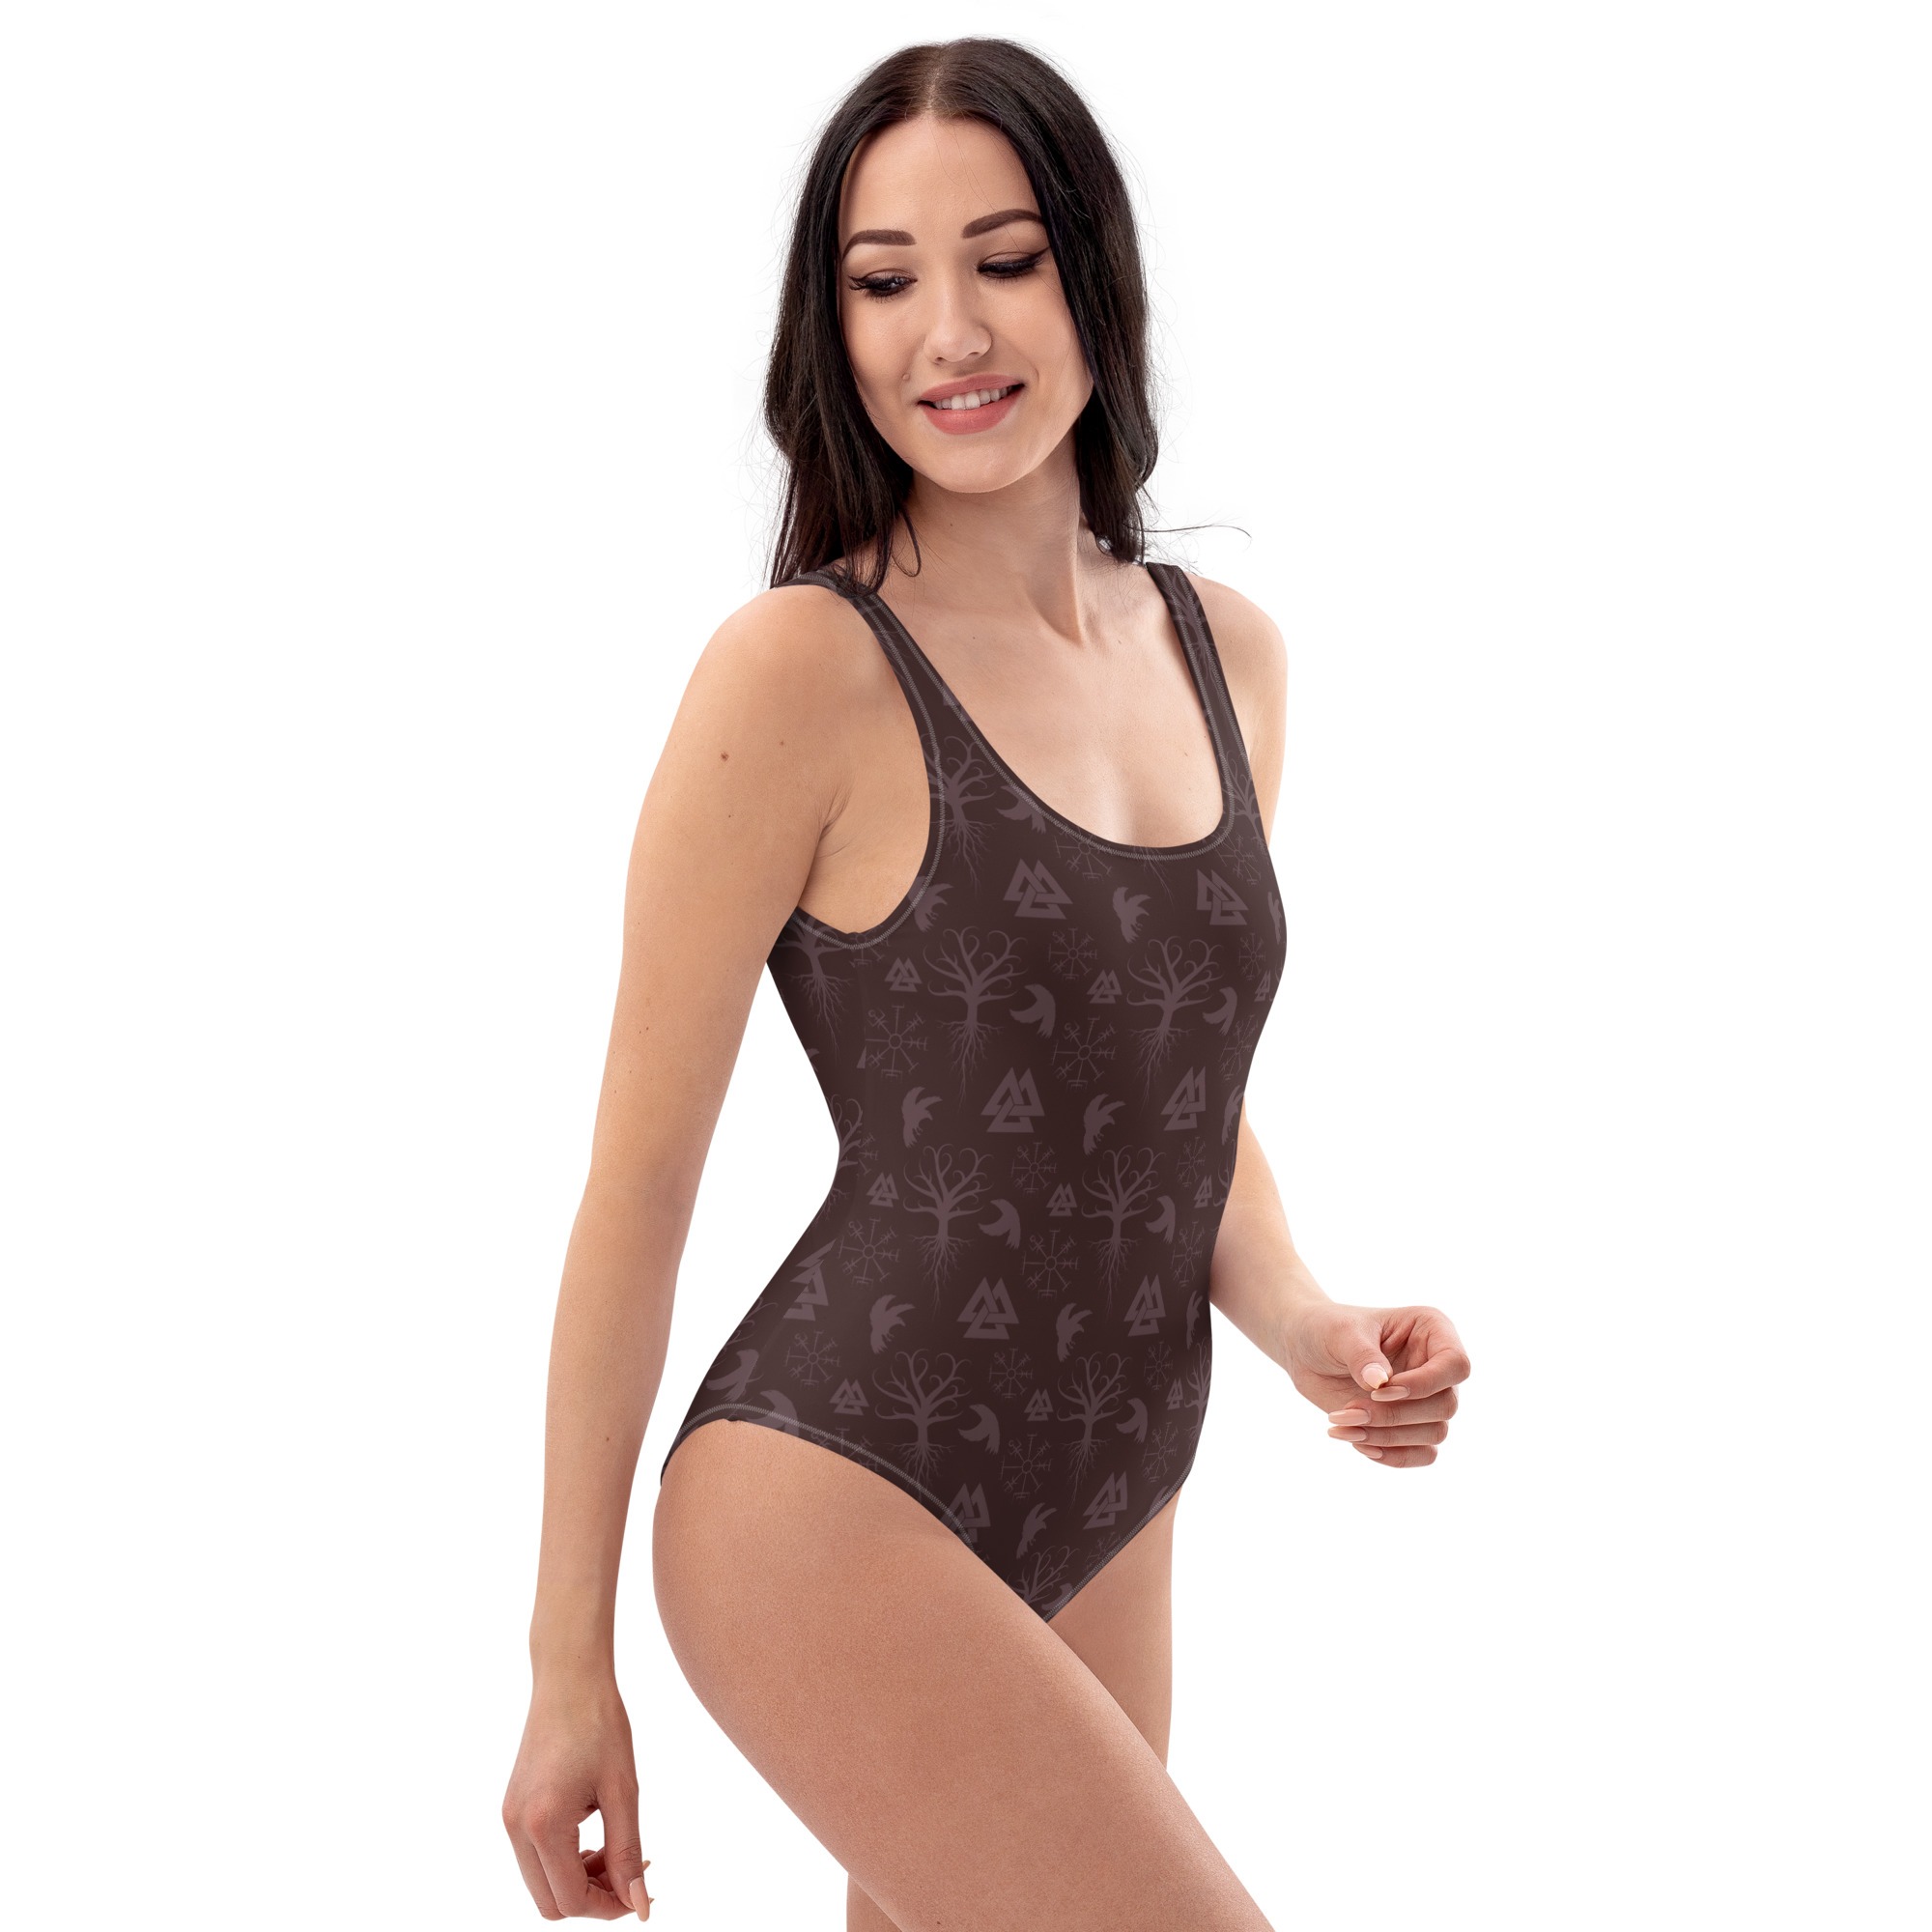 Maroon Norse Symbols One-Piece Swimsuit